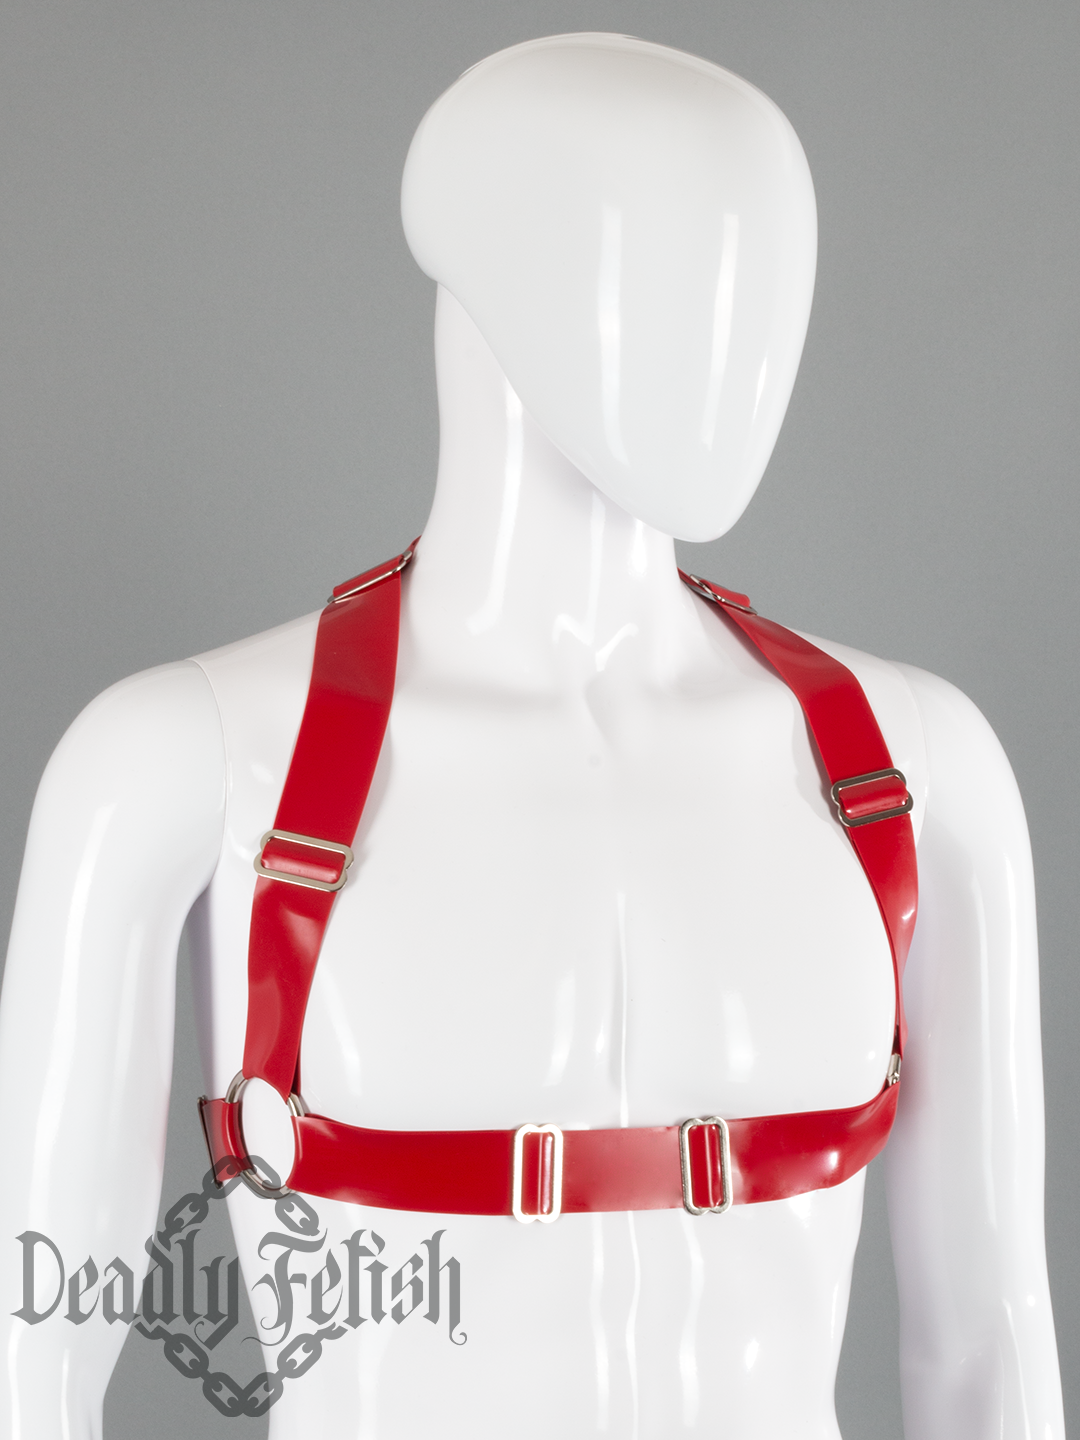 Deadly Fetish Made-to-Order Latex: Basic Harness #27